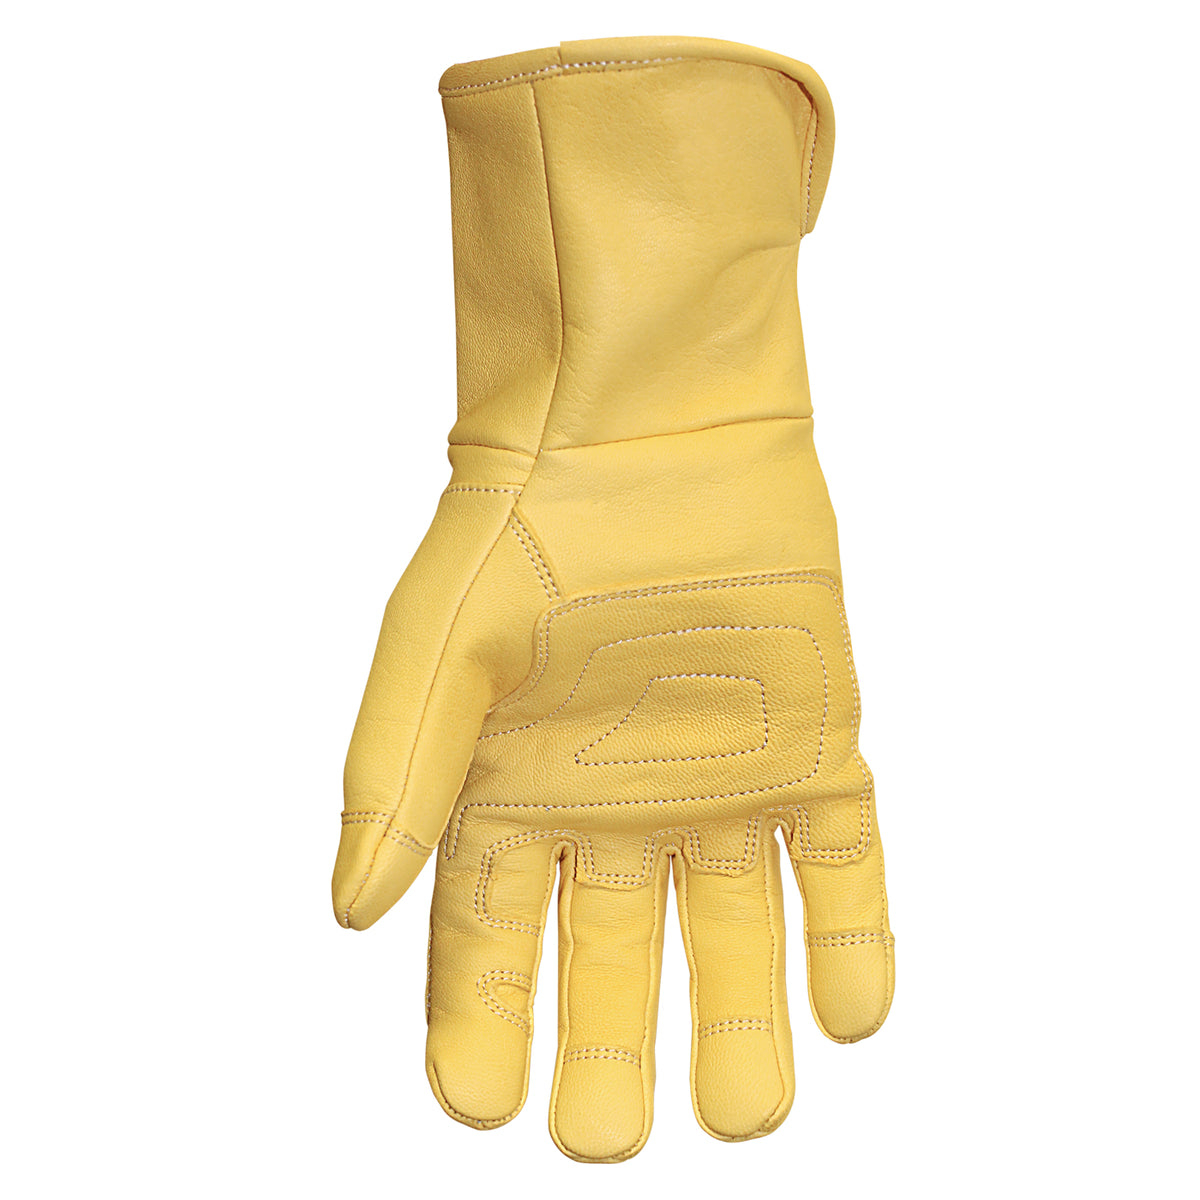 C Street Leather Palm Large Work Gloves